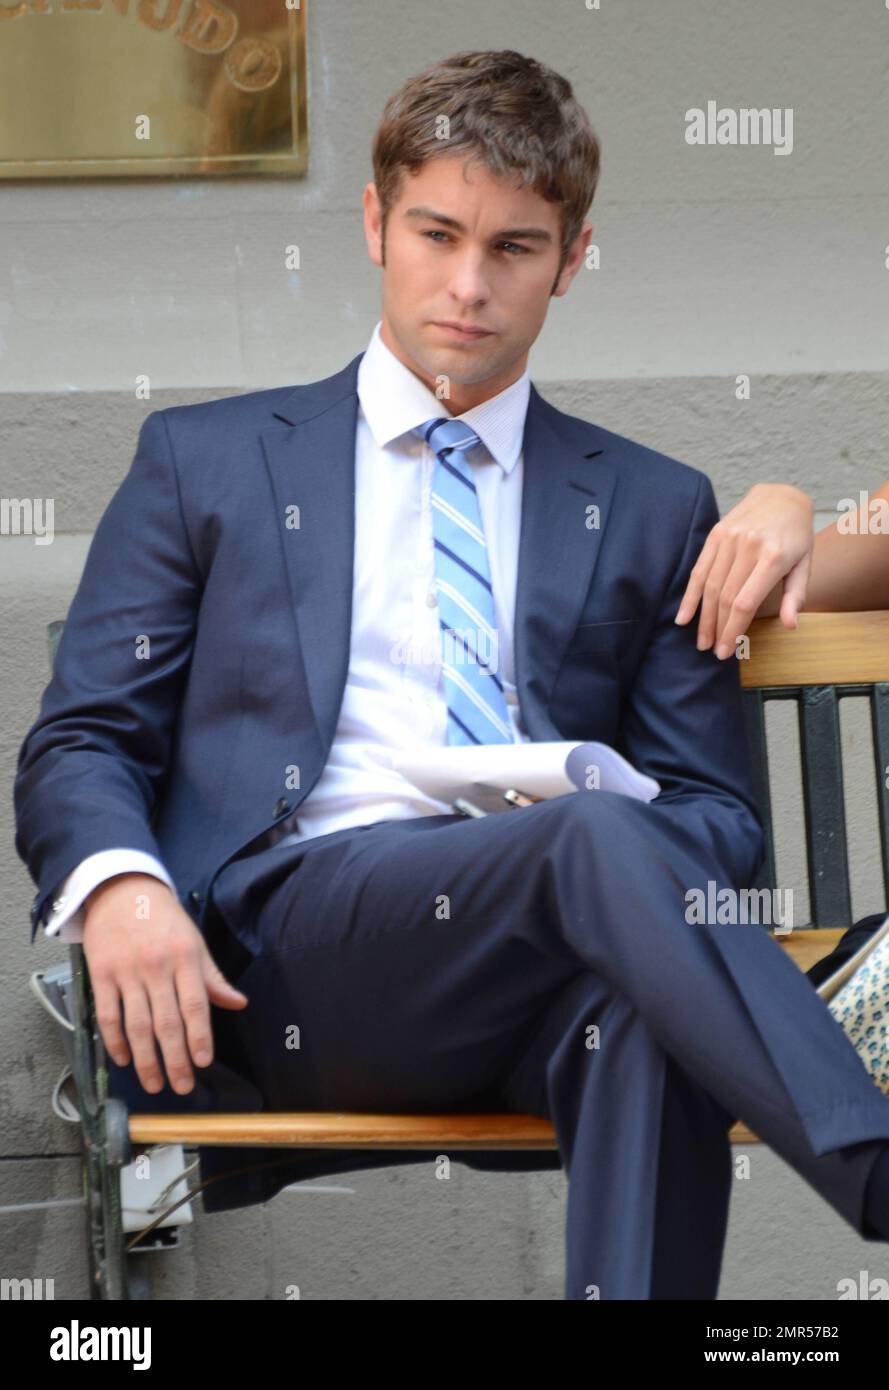 Chace Crawford films scenes on the set of 'Gossip Girl' in New York, NY. 17th July 2012. Stock Photo